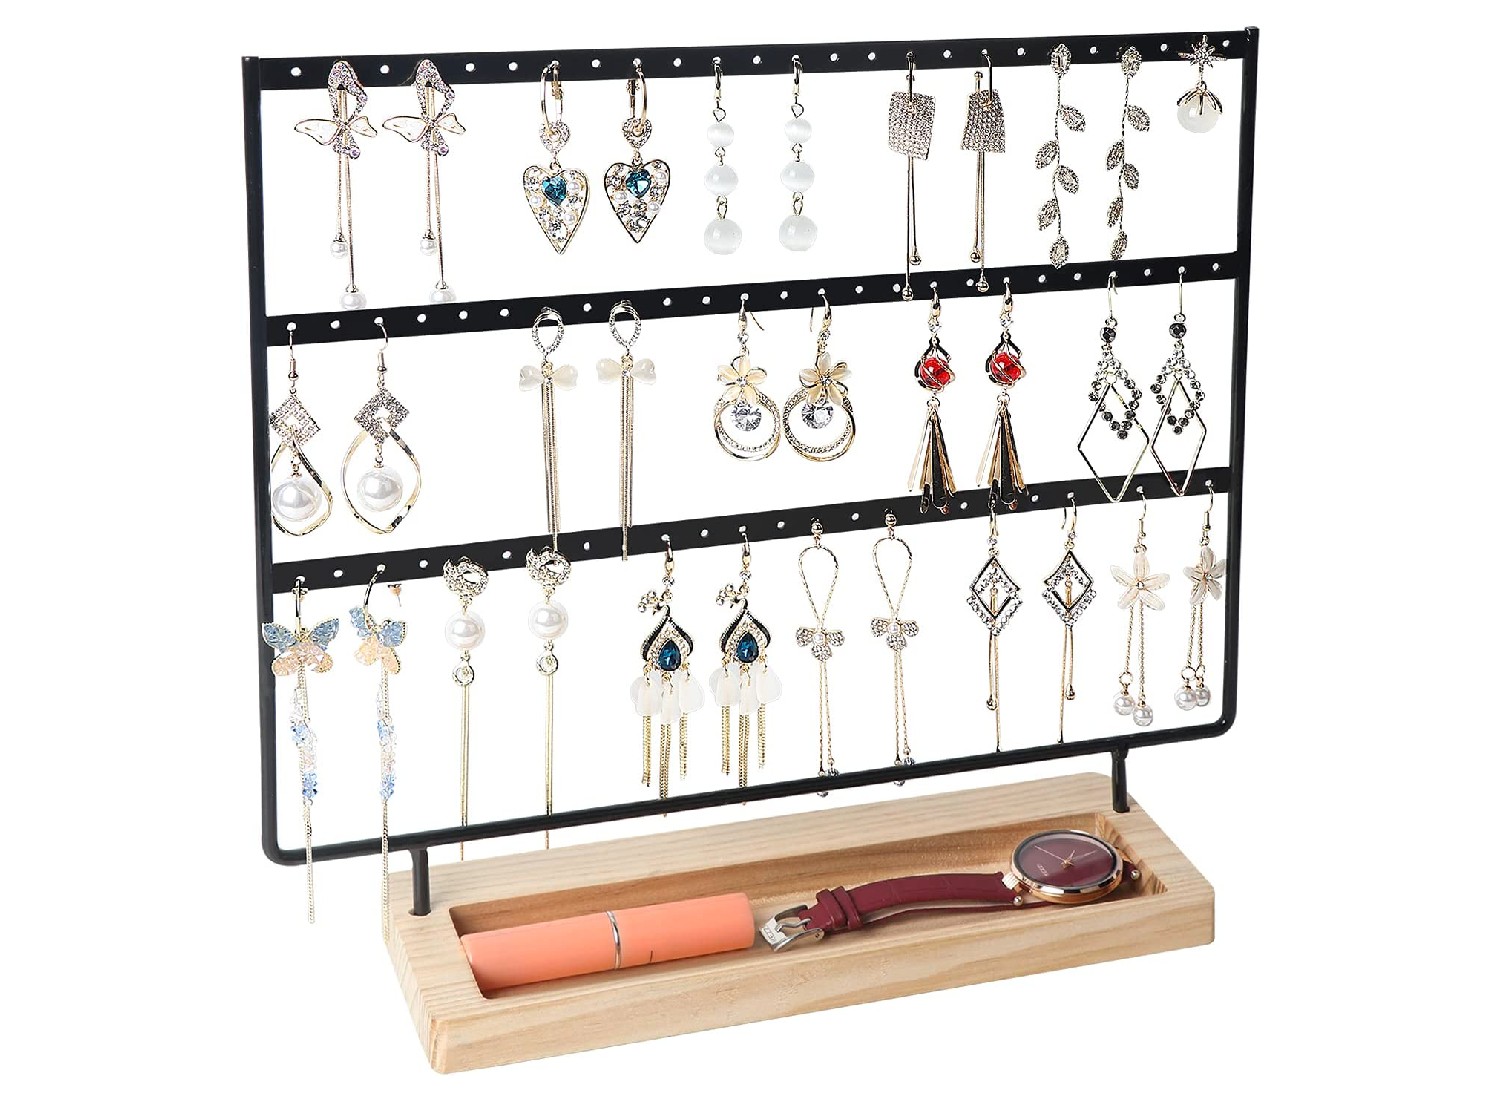 Earrings hanging from an organizer rack.